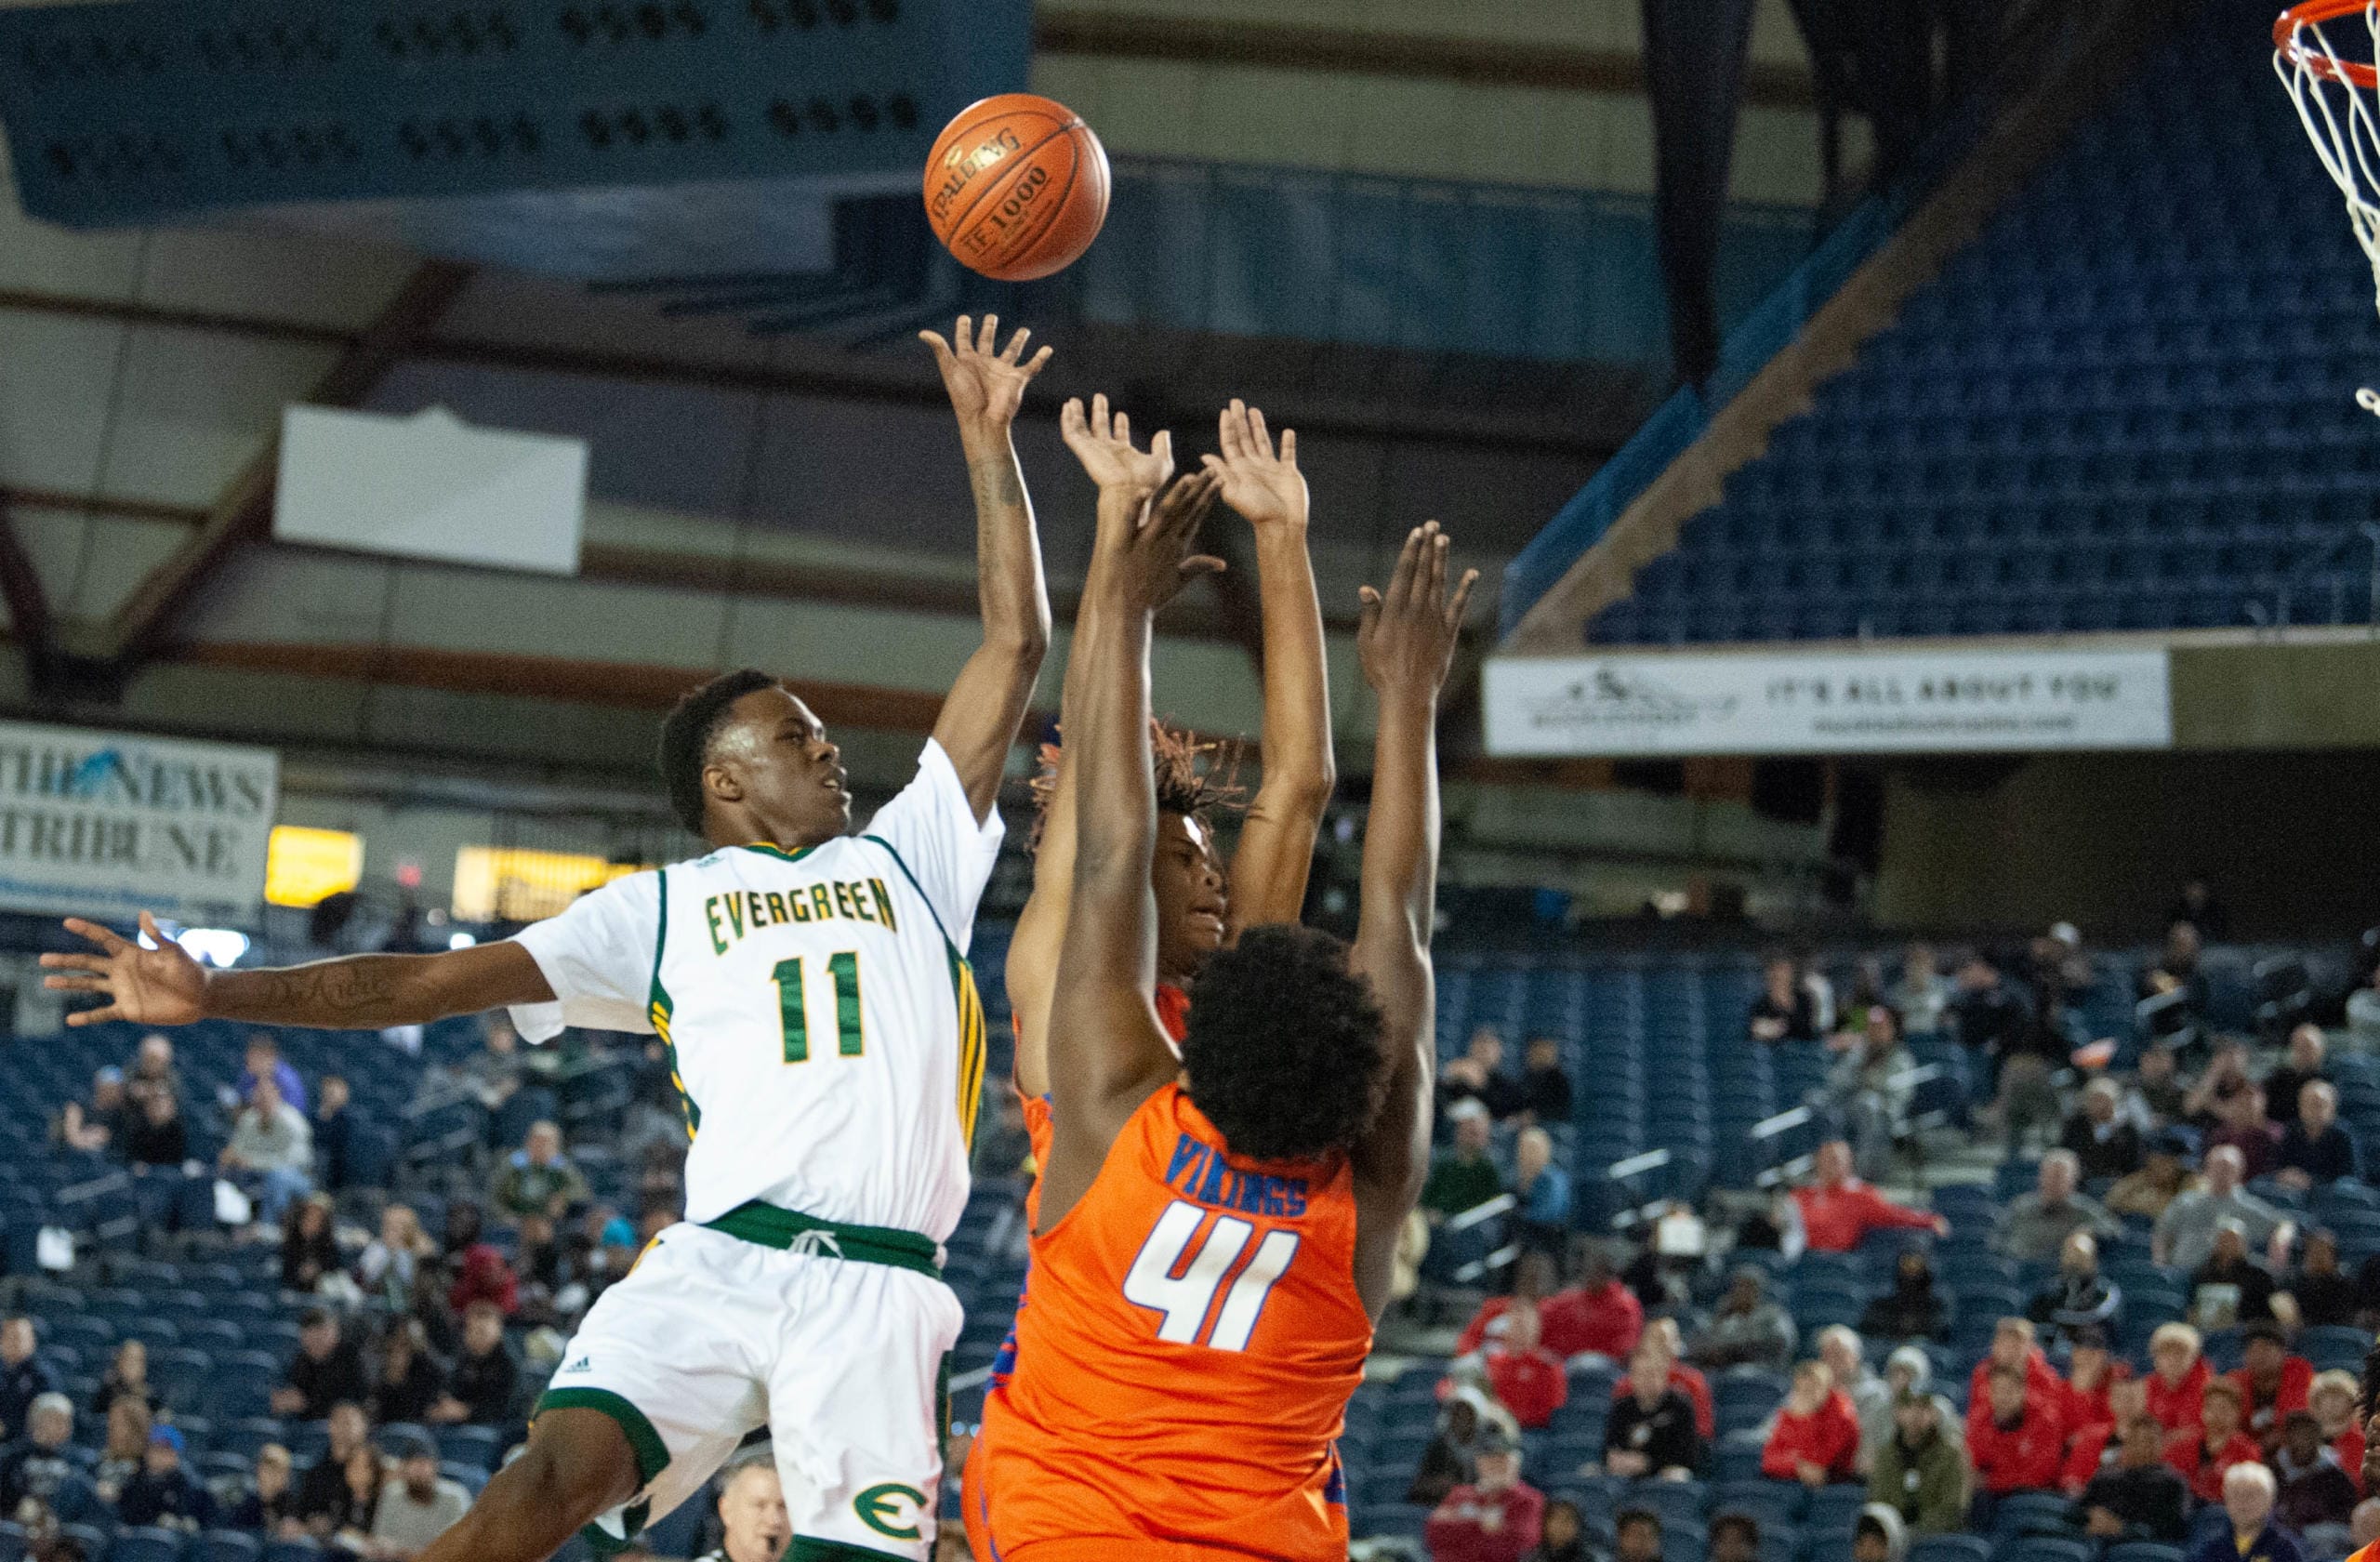 Evergreen's Mario Herring lifts a floater over a pair of Rainier Beach defenders in a 3A round of 12 game on Wednesday at the Tacoma Dome.